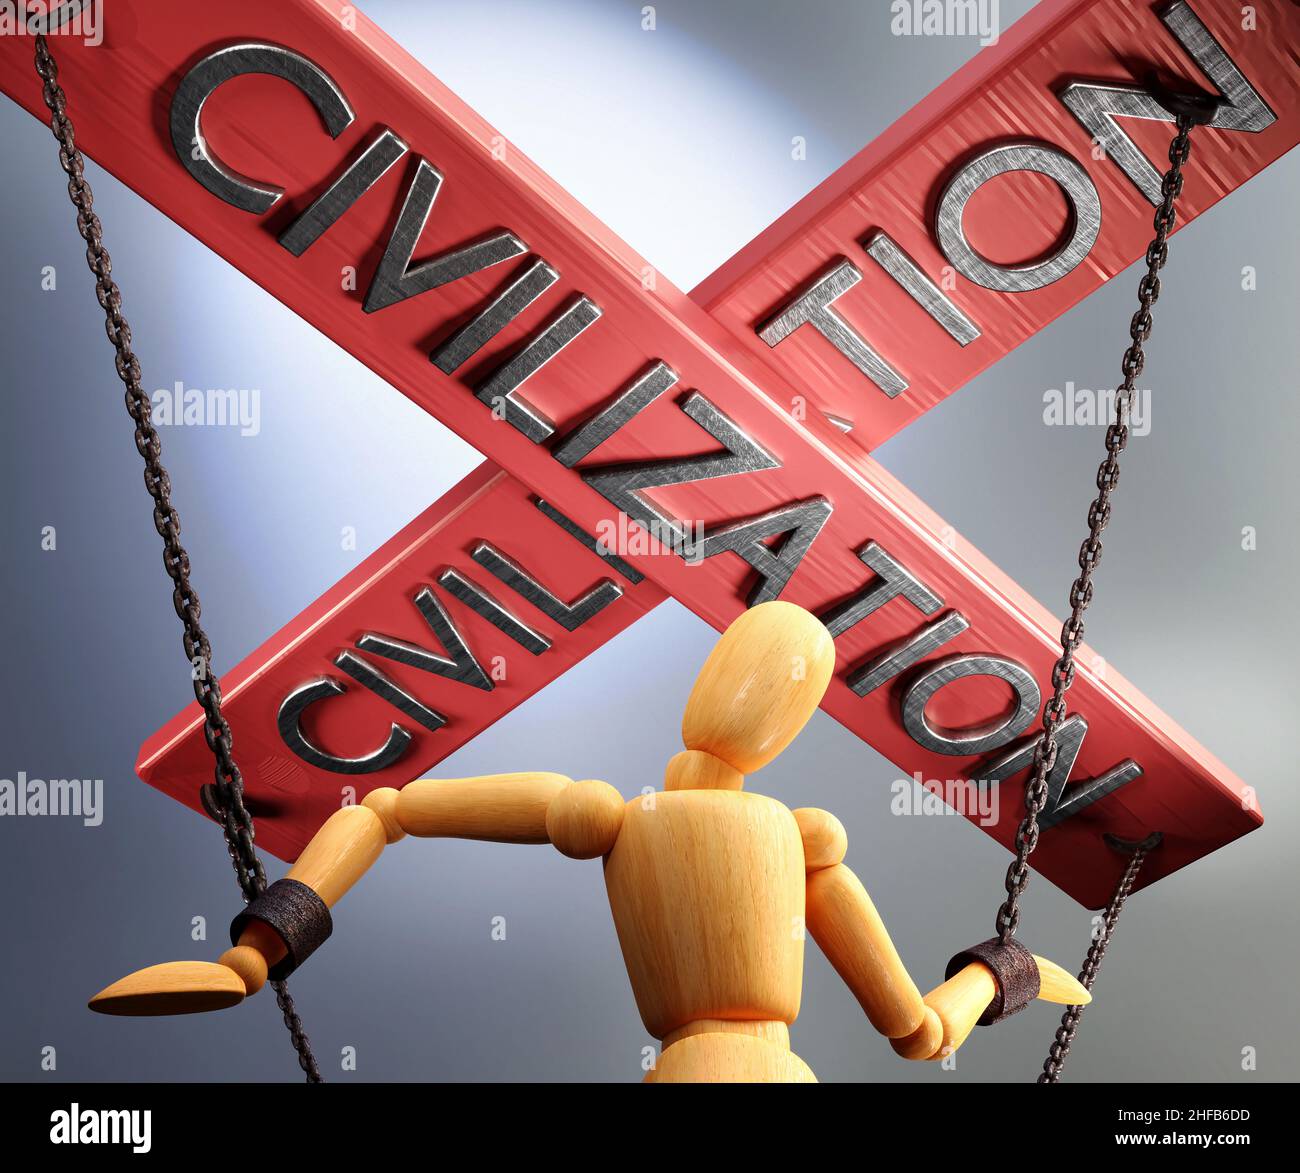 Civilization control, power, influence and manipulation symbolized by control bar with word Civilization pulling the strings (chains) of a wooden pupp Stock Photo